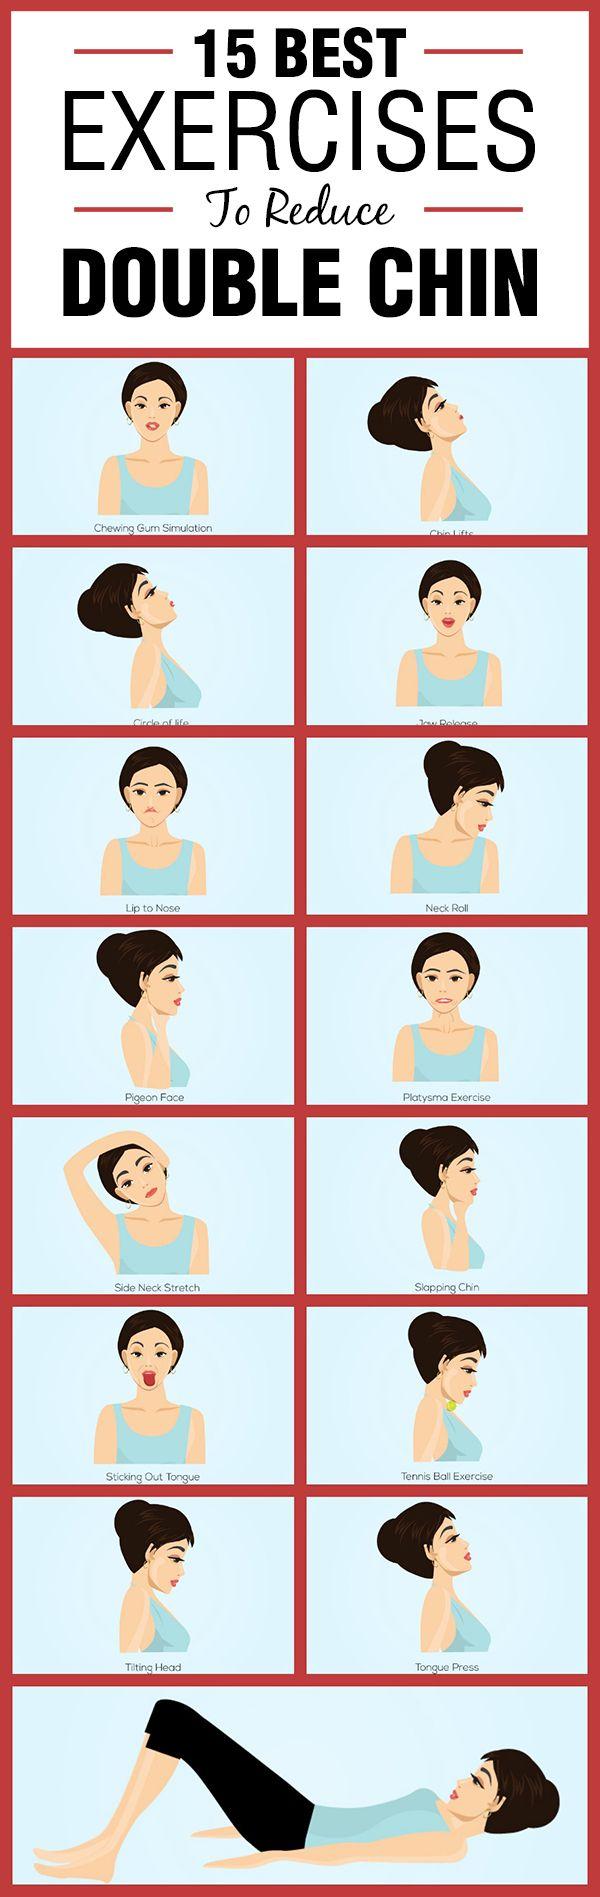 Wedding - 15 Best Exercises To Reduce Double Chin